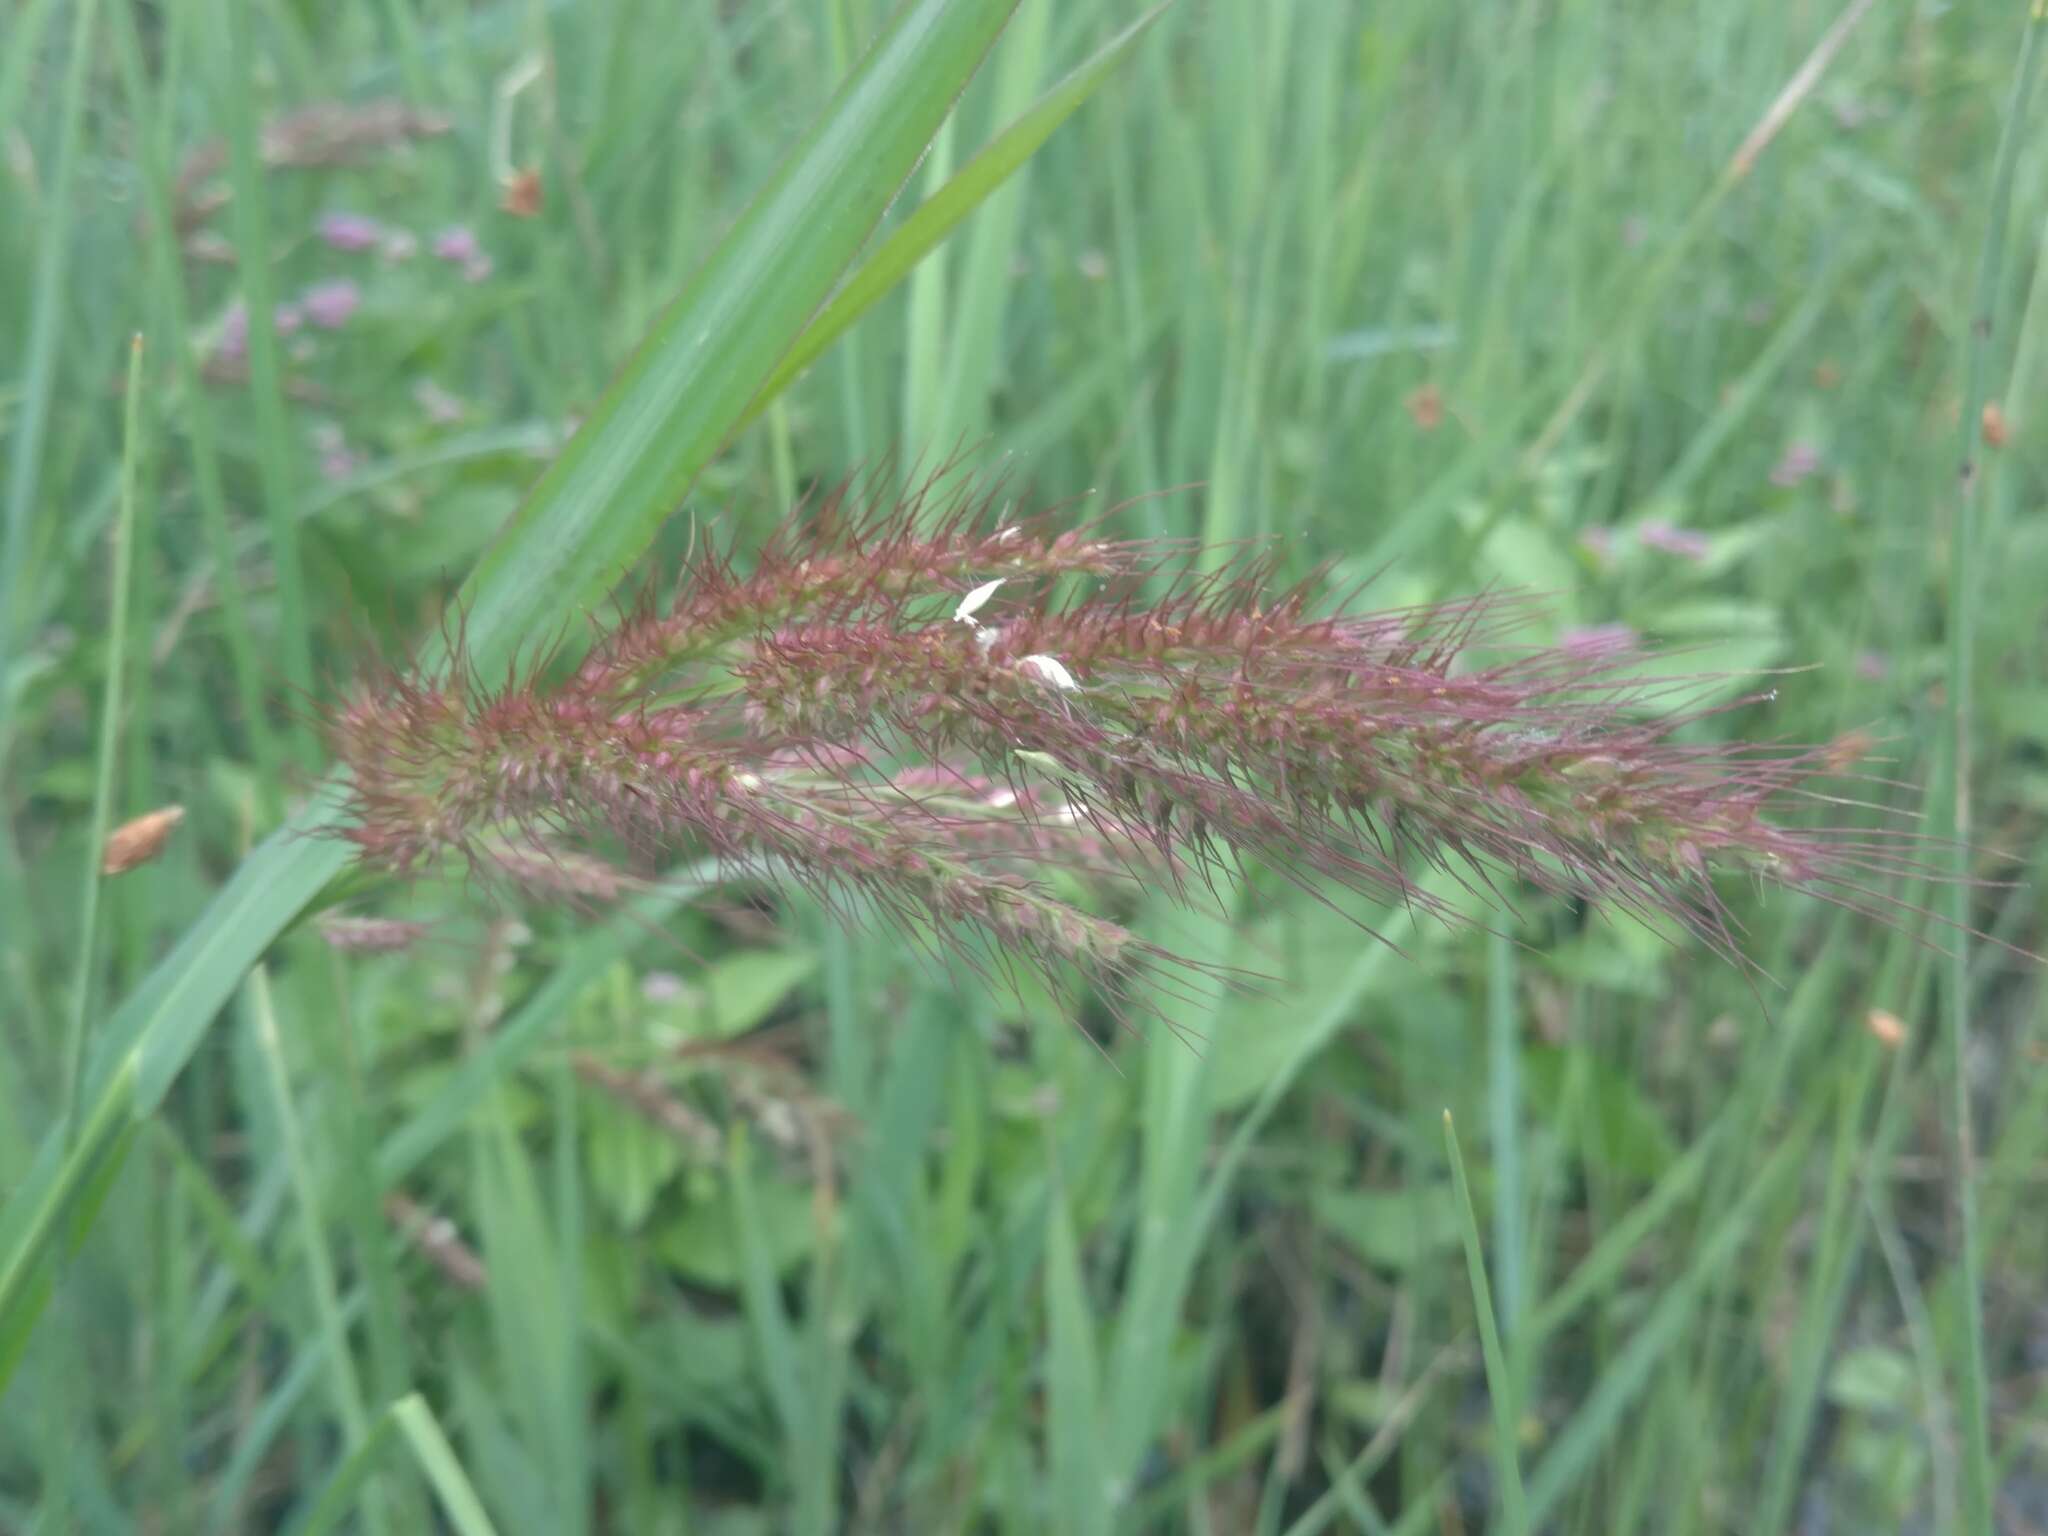 Image of Long-Awn Cock's-Spur Grass